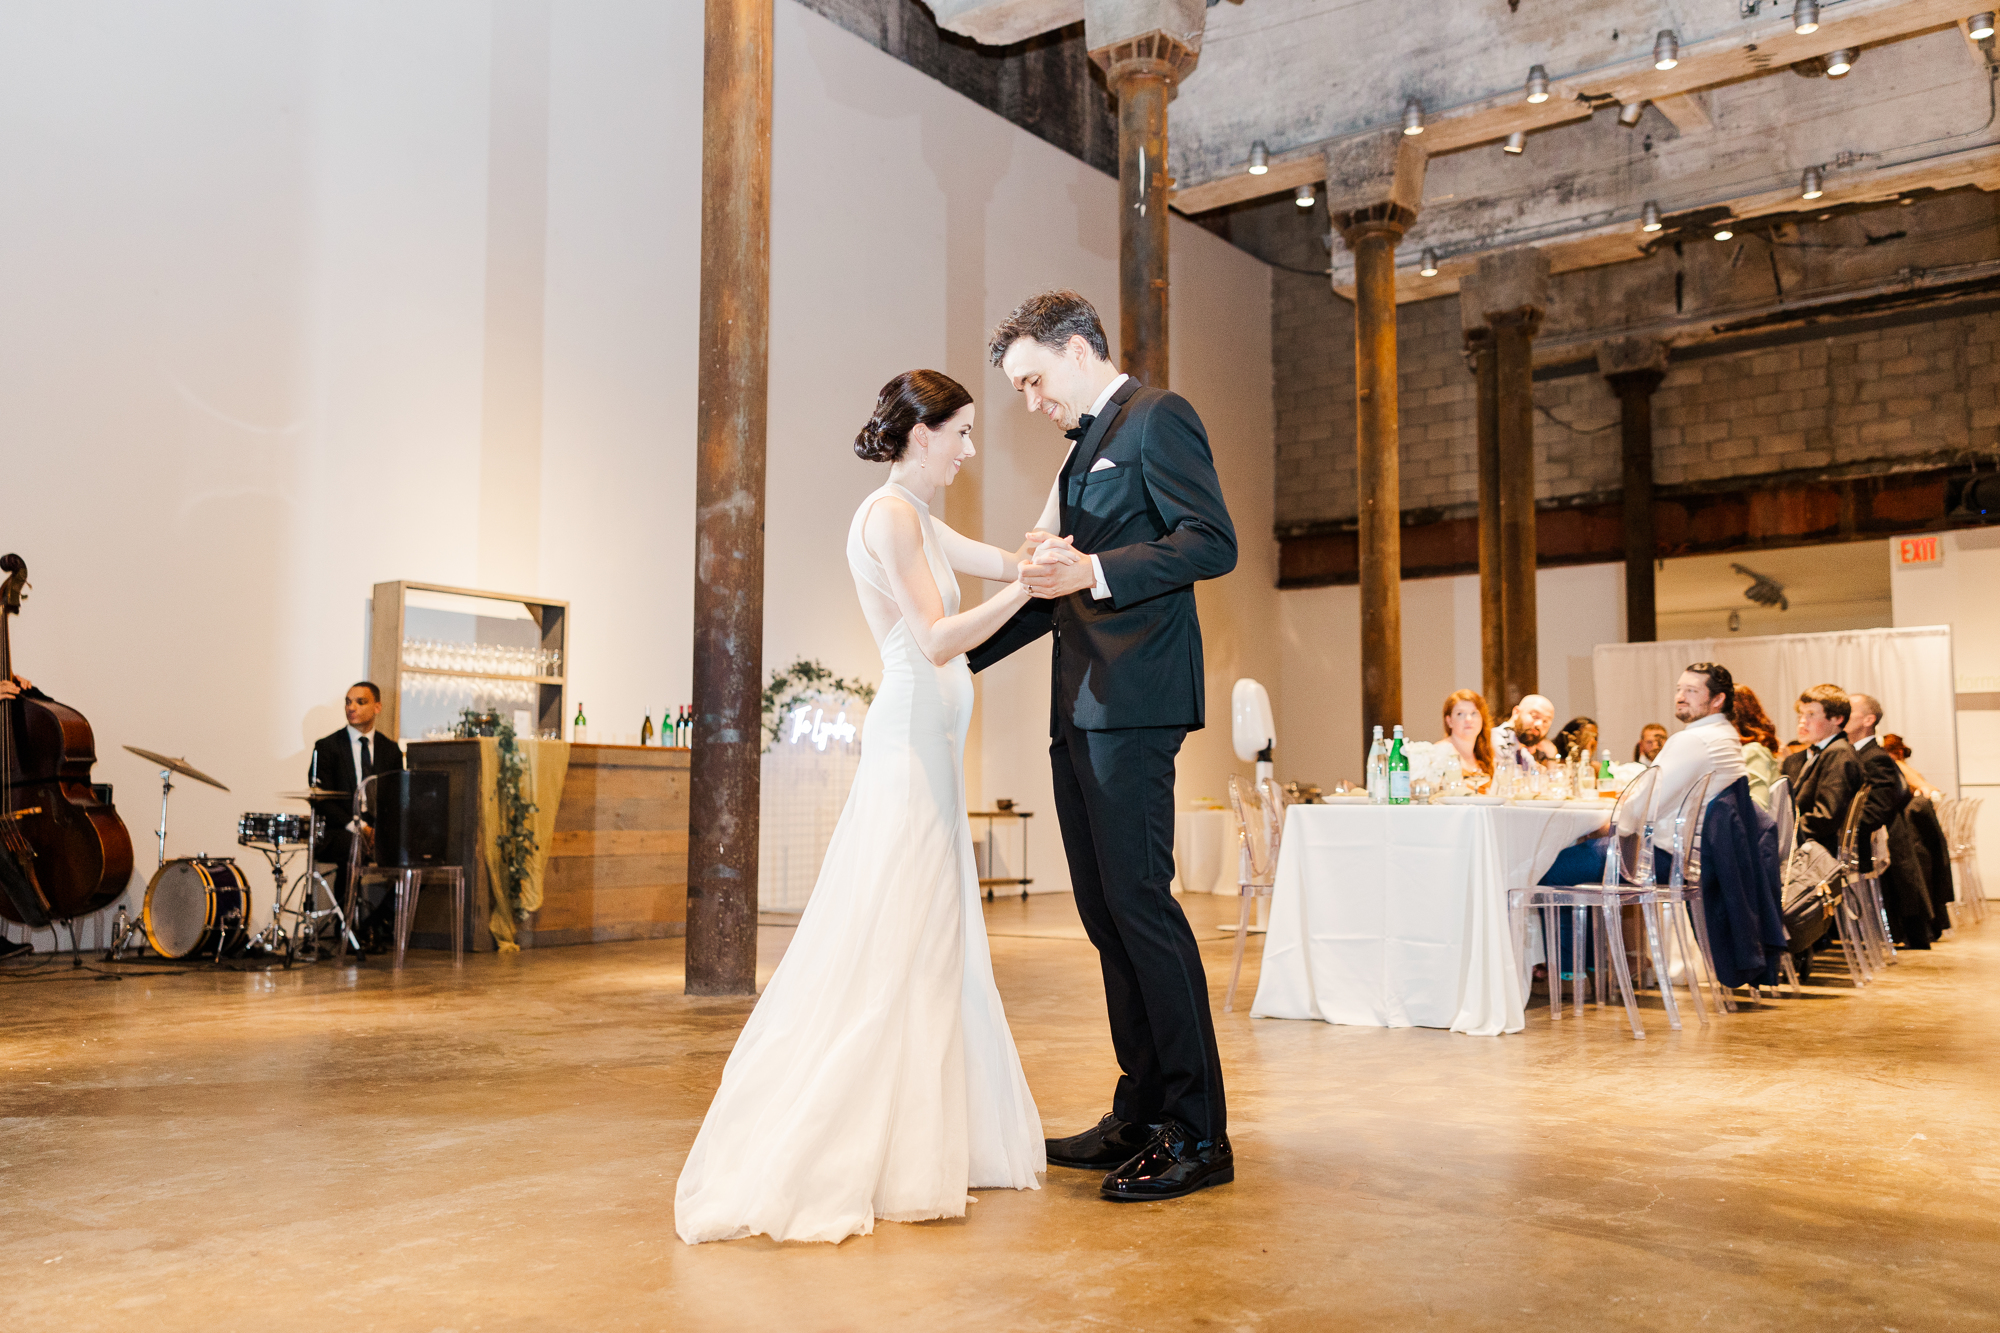 Cinematic DUMBO, Brooklyn Wedding Photos at Smack Mellon and Jane's Carousel